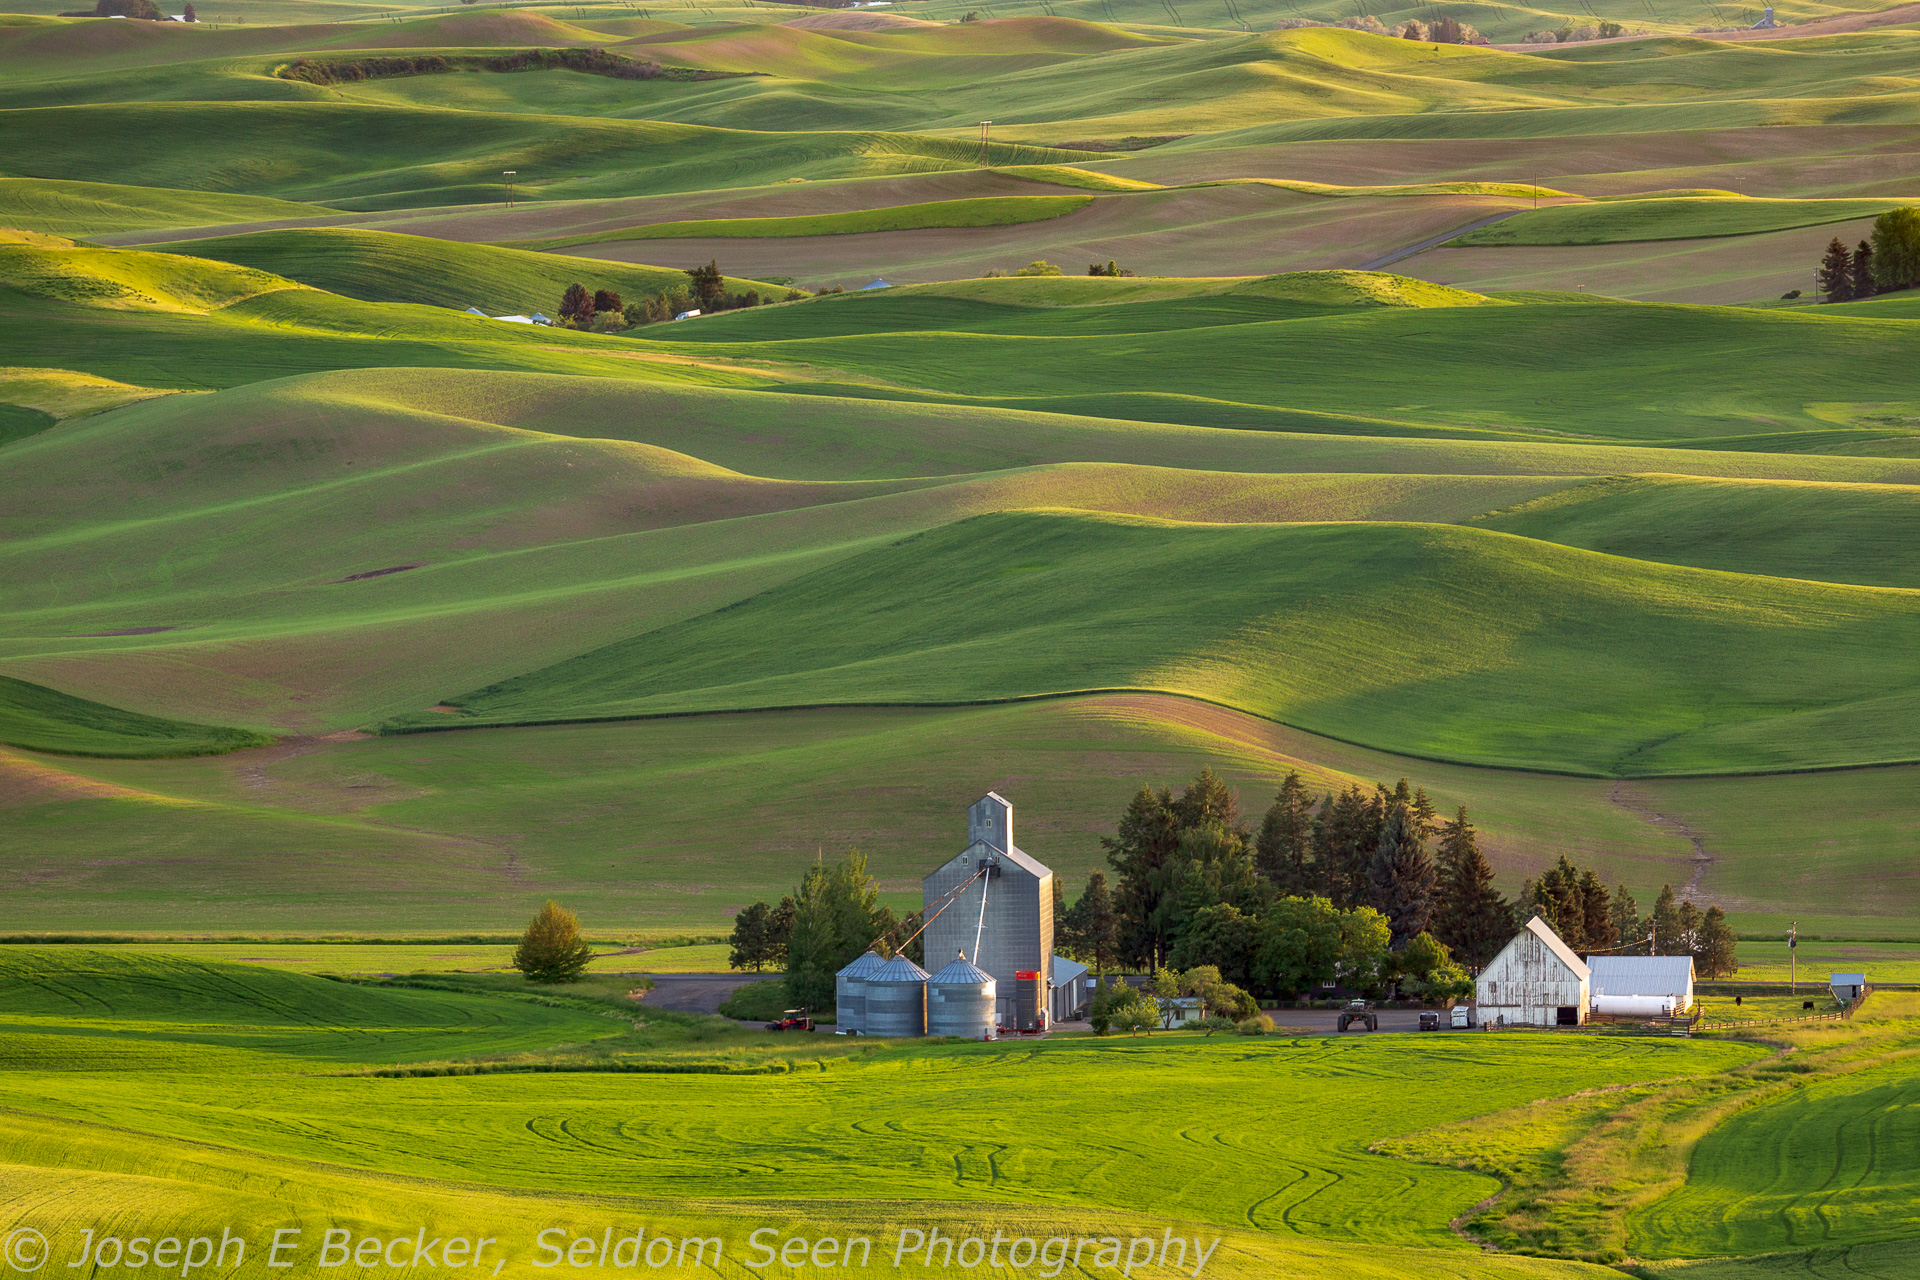 Steptoeless – A Photographic Guide to Non-Steptoe Butte Palouse Viewpoints